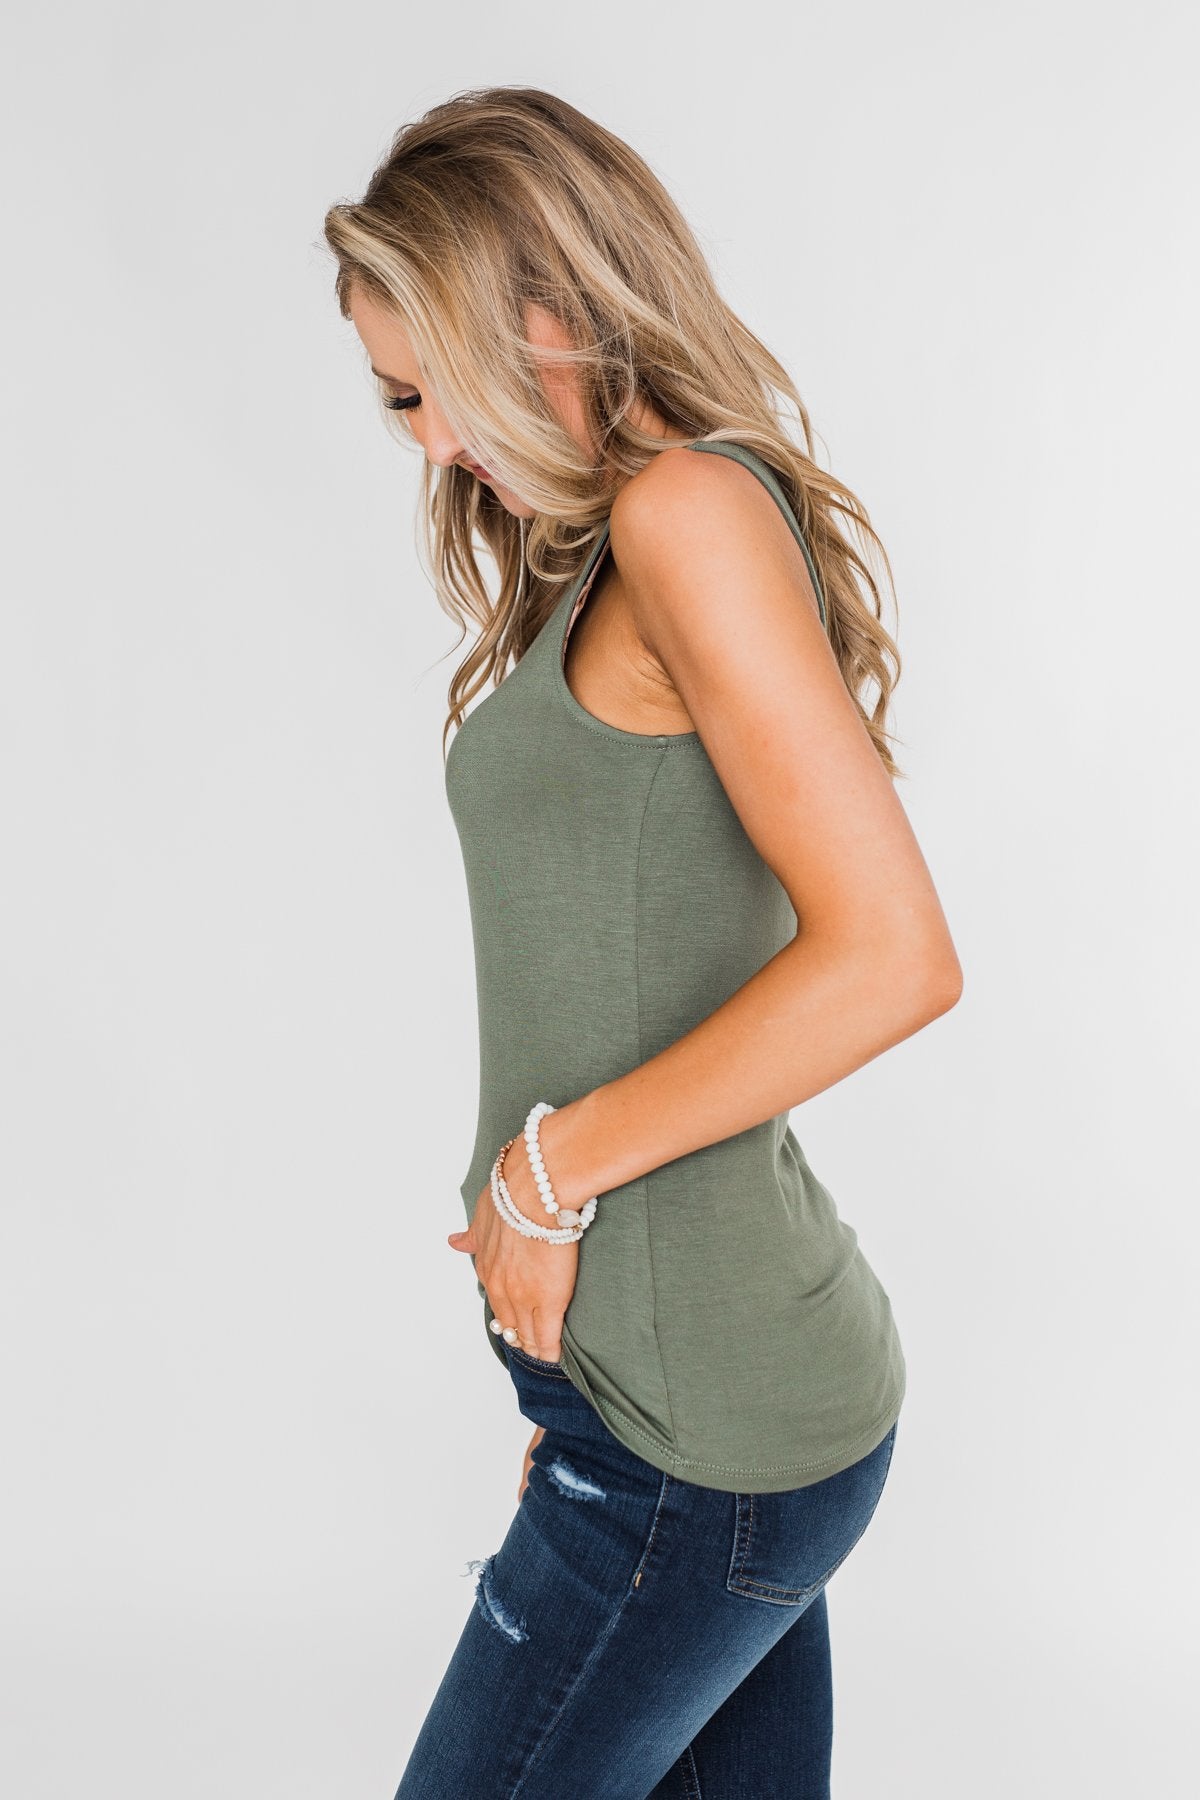 Places to Go Criss Cross Tank Top- Olive